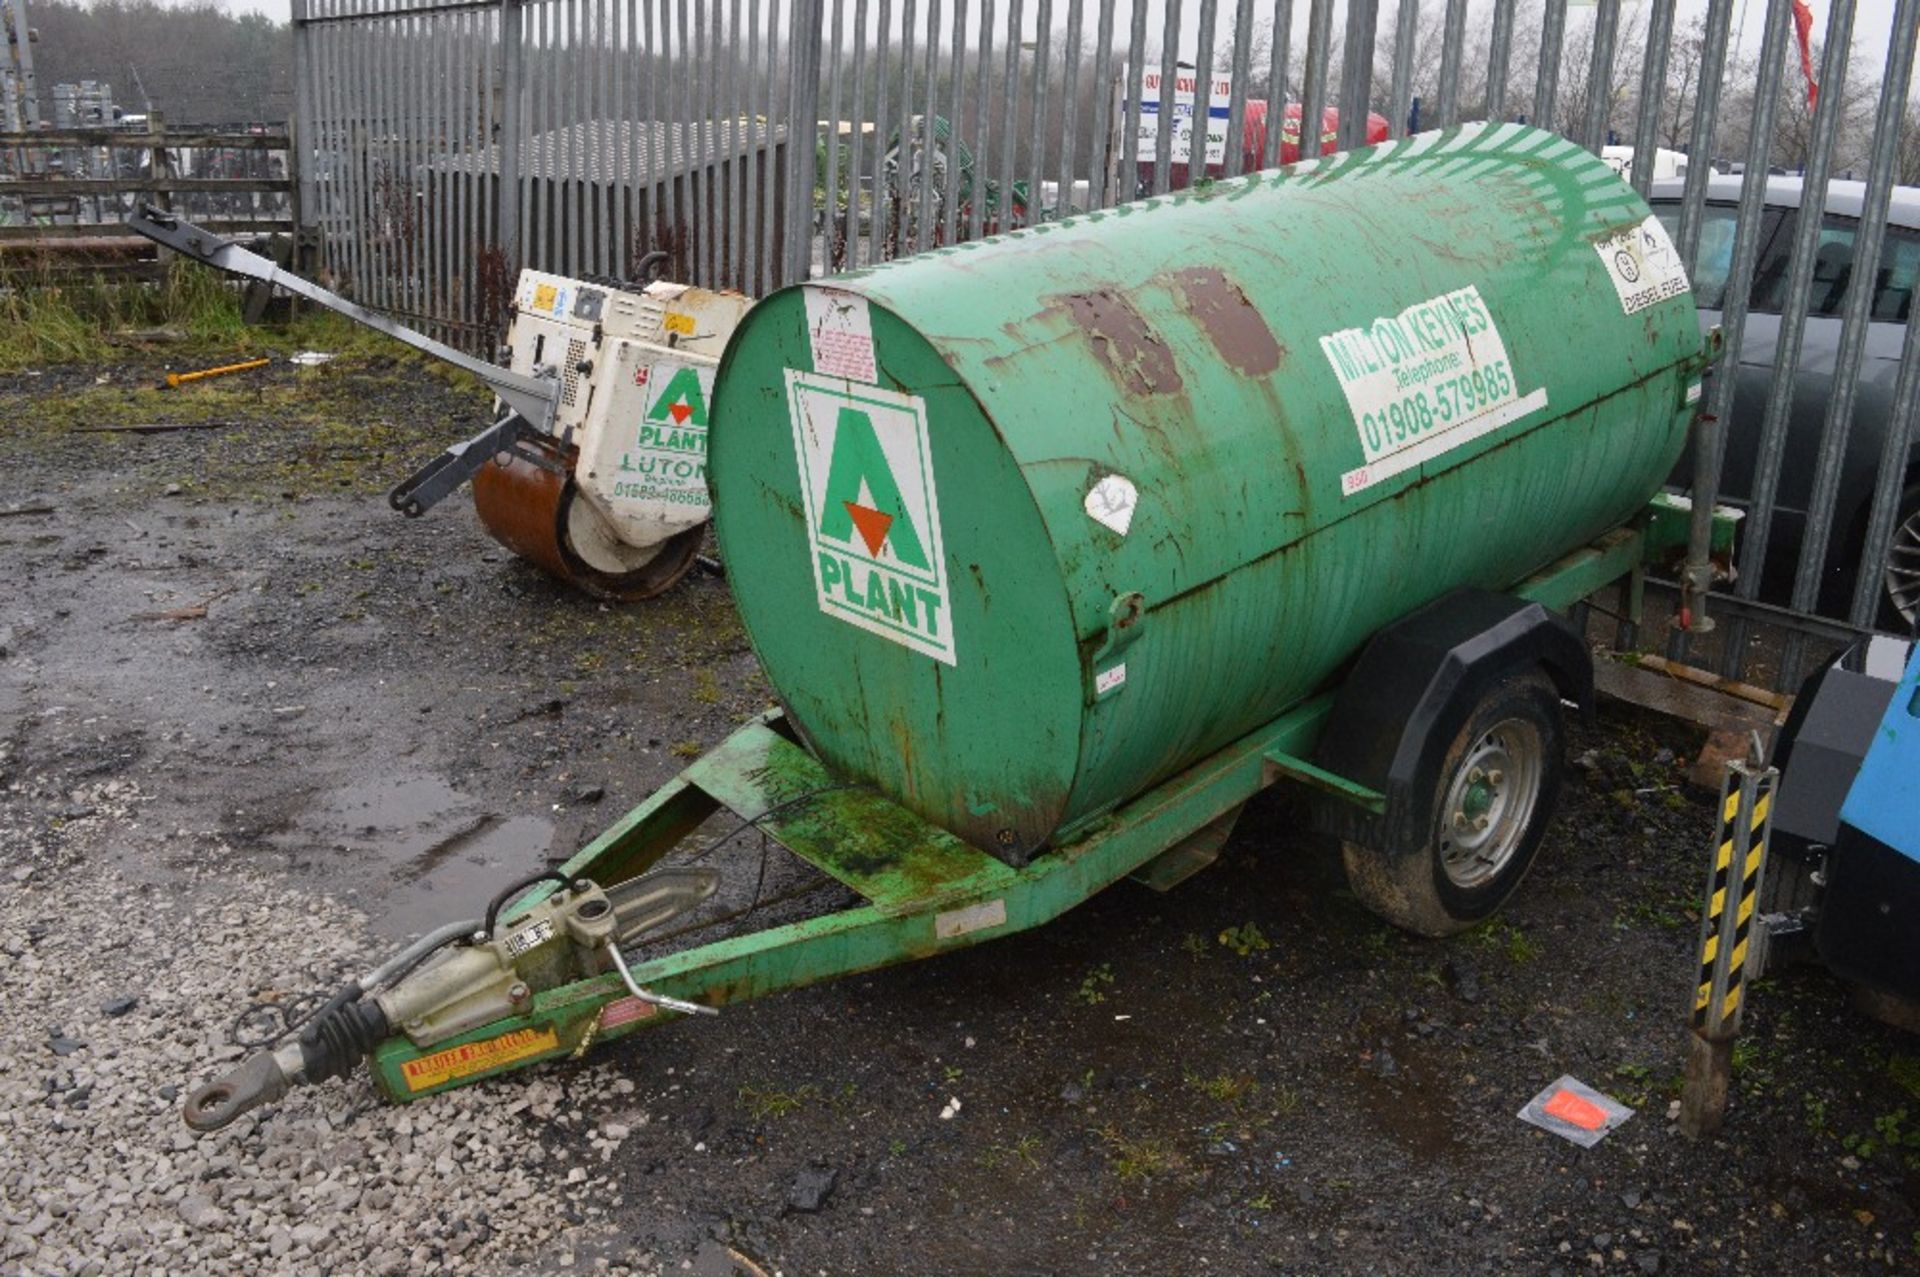 Trailer Engineering 250 gallon fast tow fuel bowser
c/w manual pump, delivery hose & nozzle